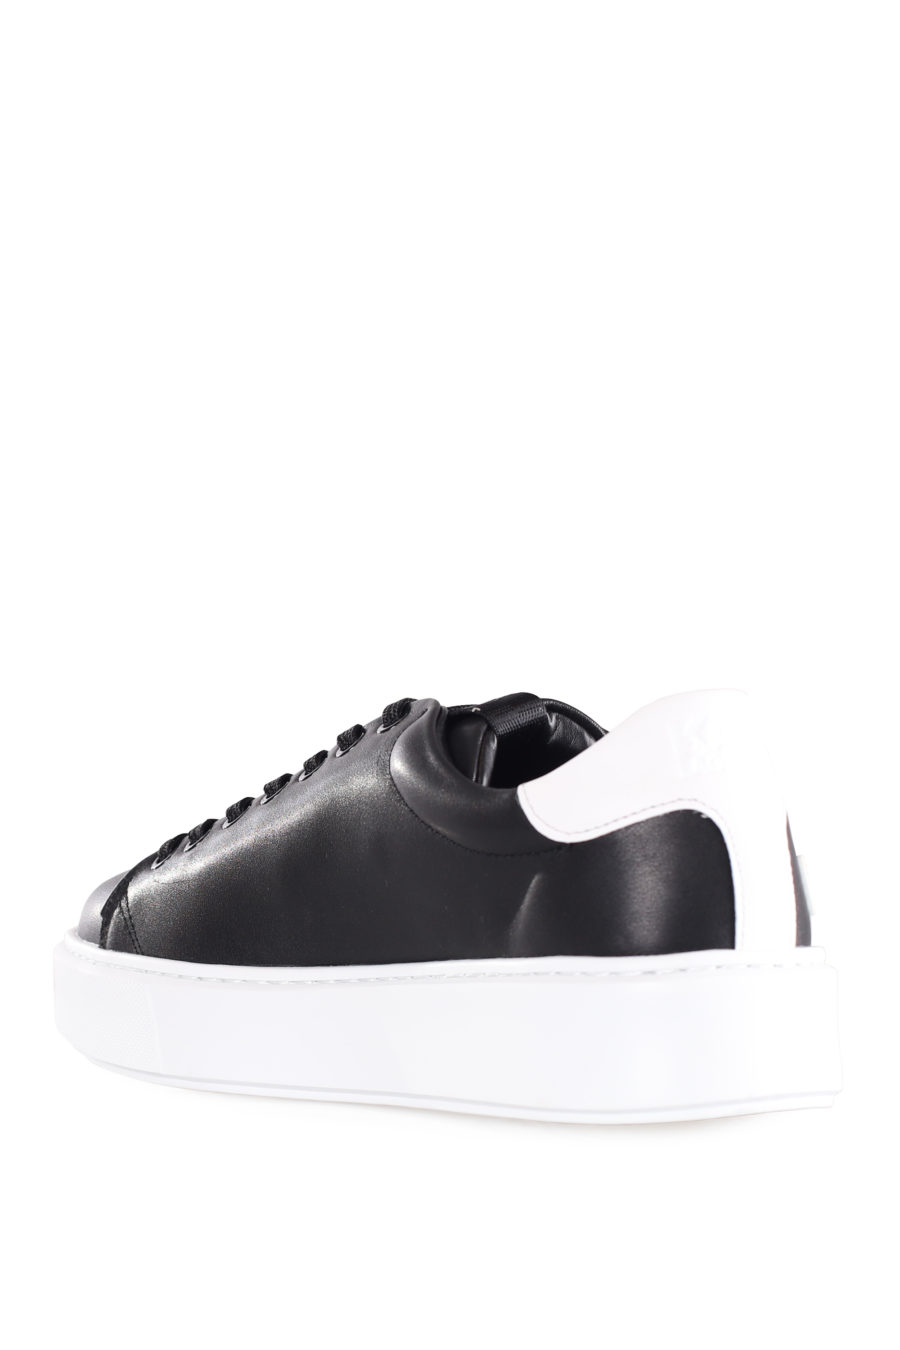 Black trainers with maxi rubber logo - IMG 9577